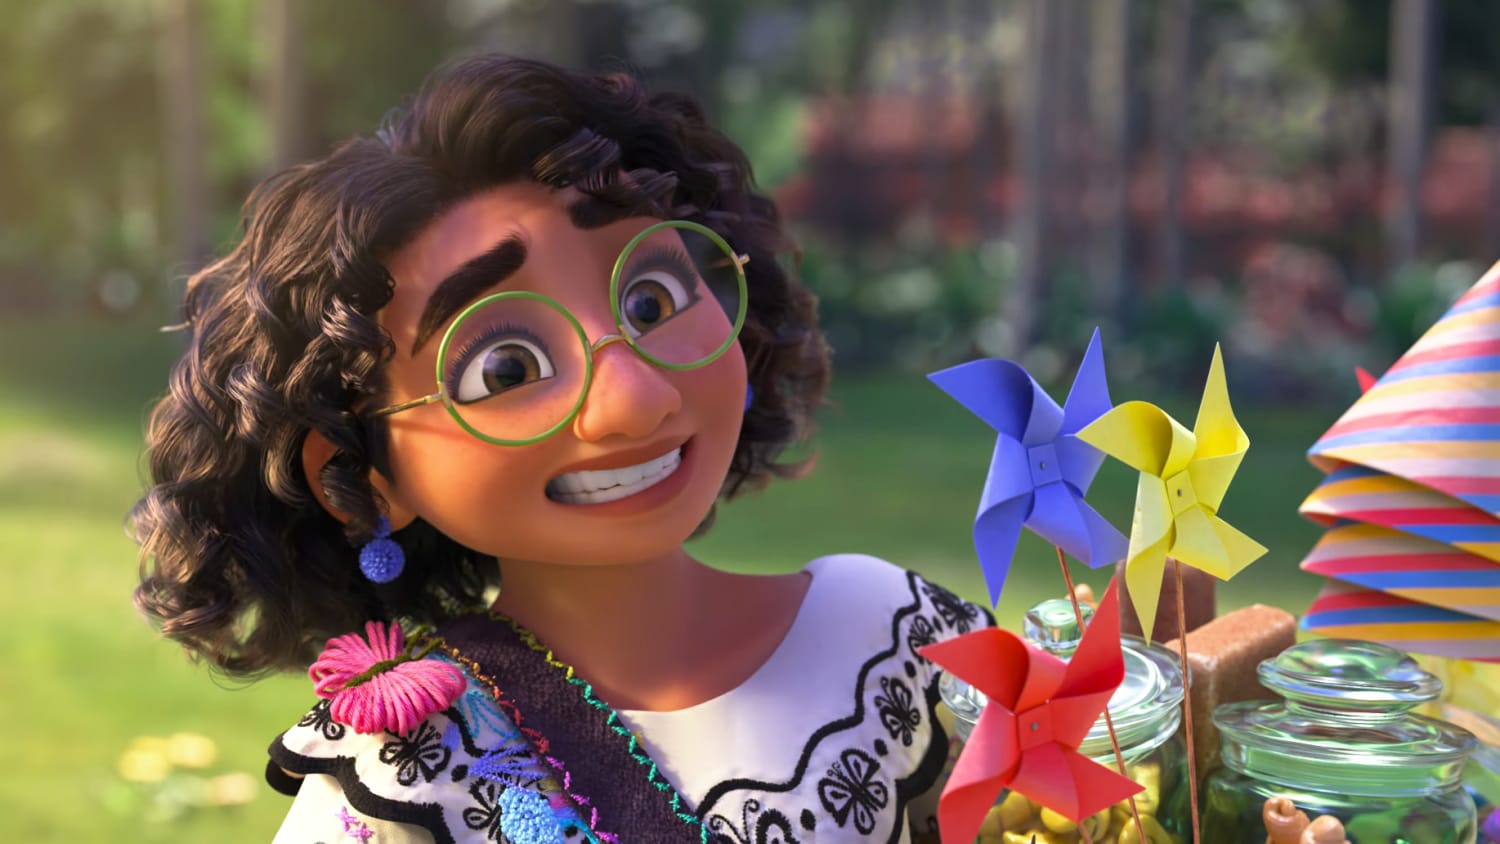 Disney debuts trailer for its Latino-themed animated movie 'Encanto,' set  in Colombia